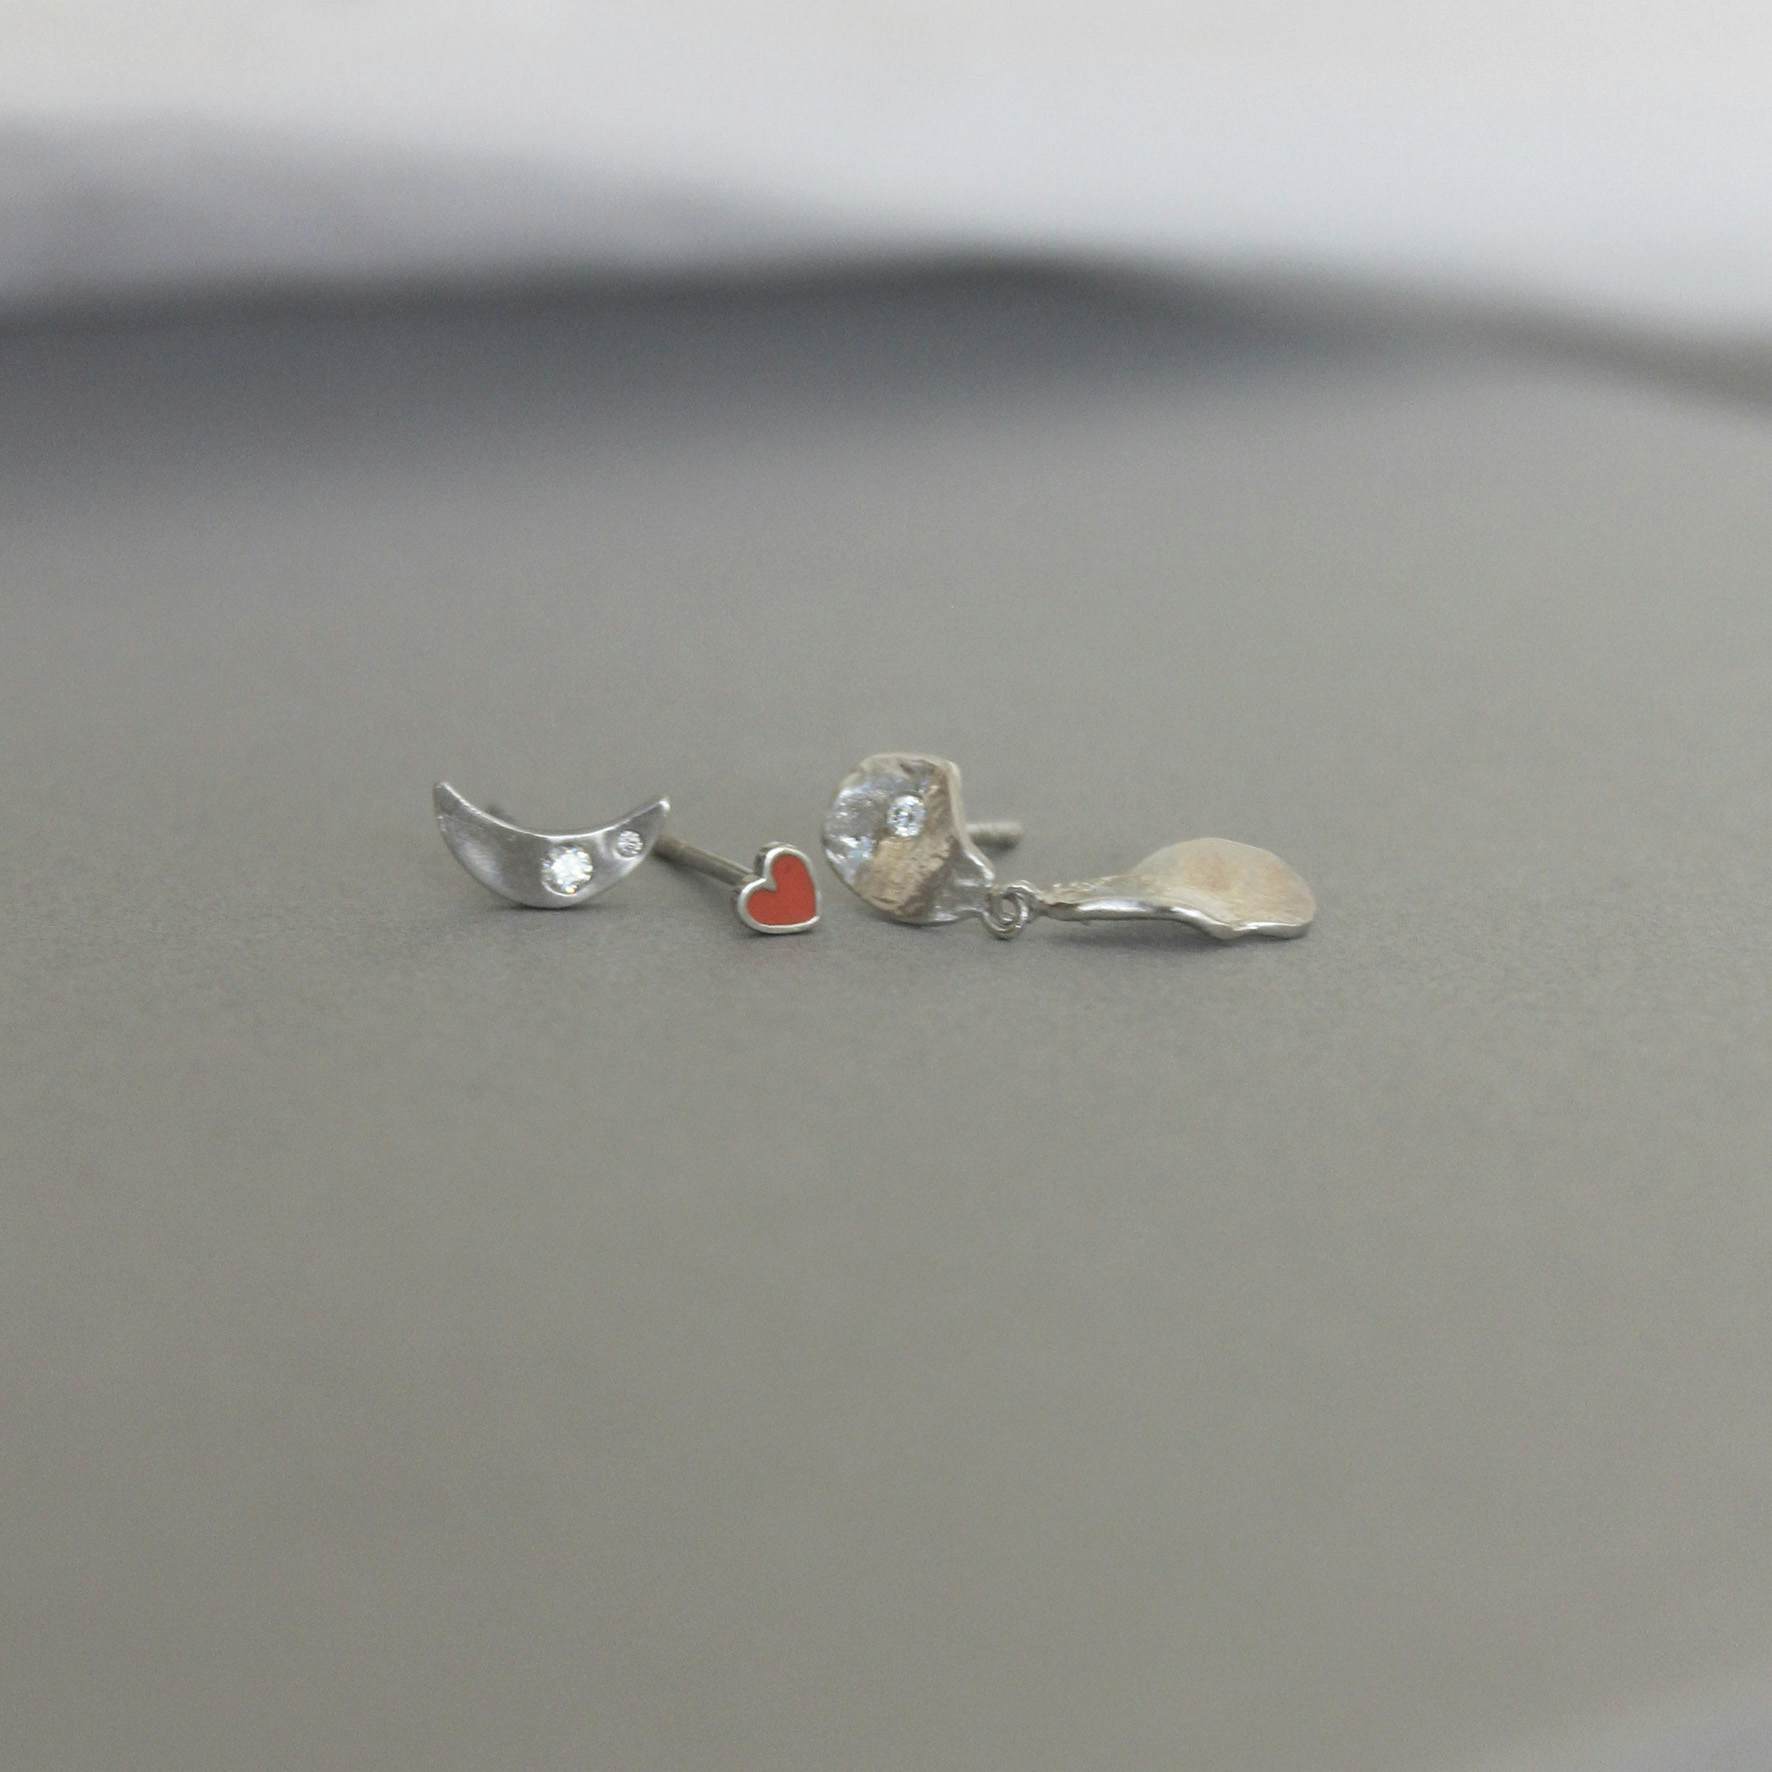 Clear Sea Earring With Stone fra STINE A Jewelry i Forgylt-Sølv Sterling 925